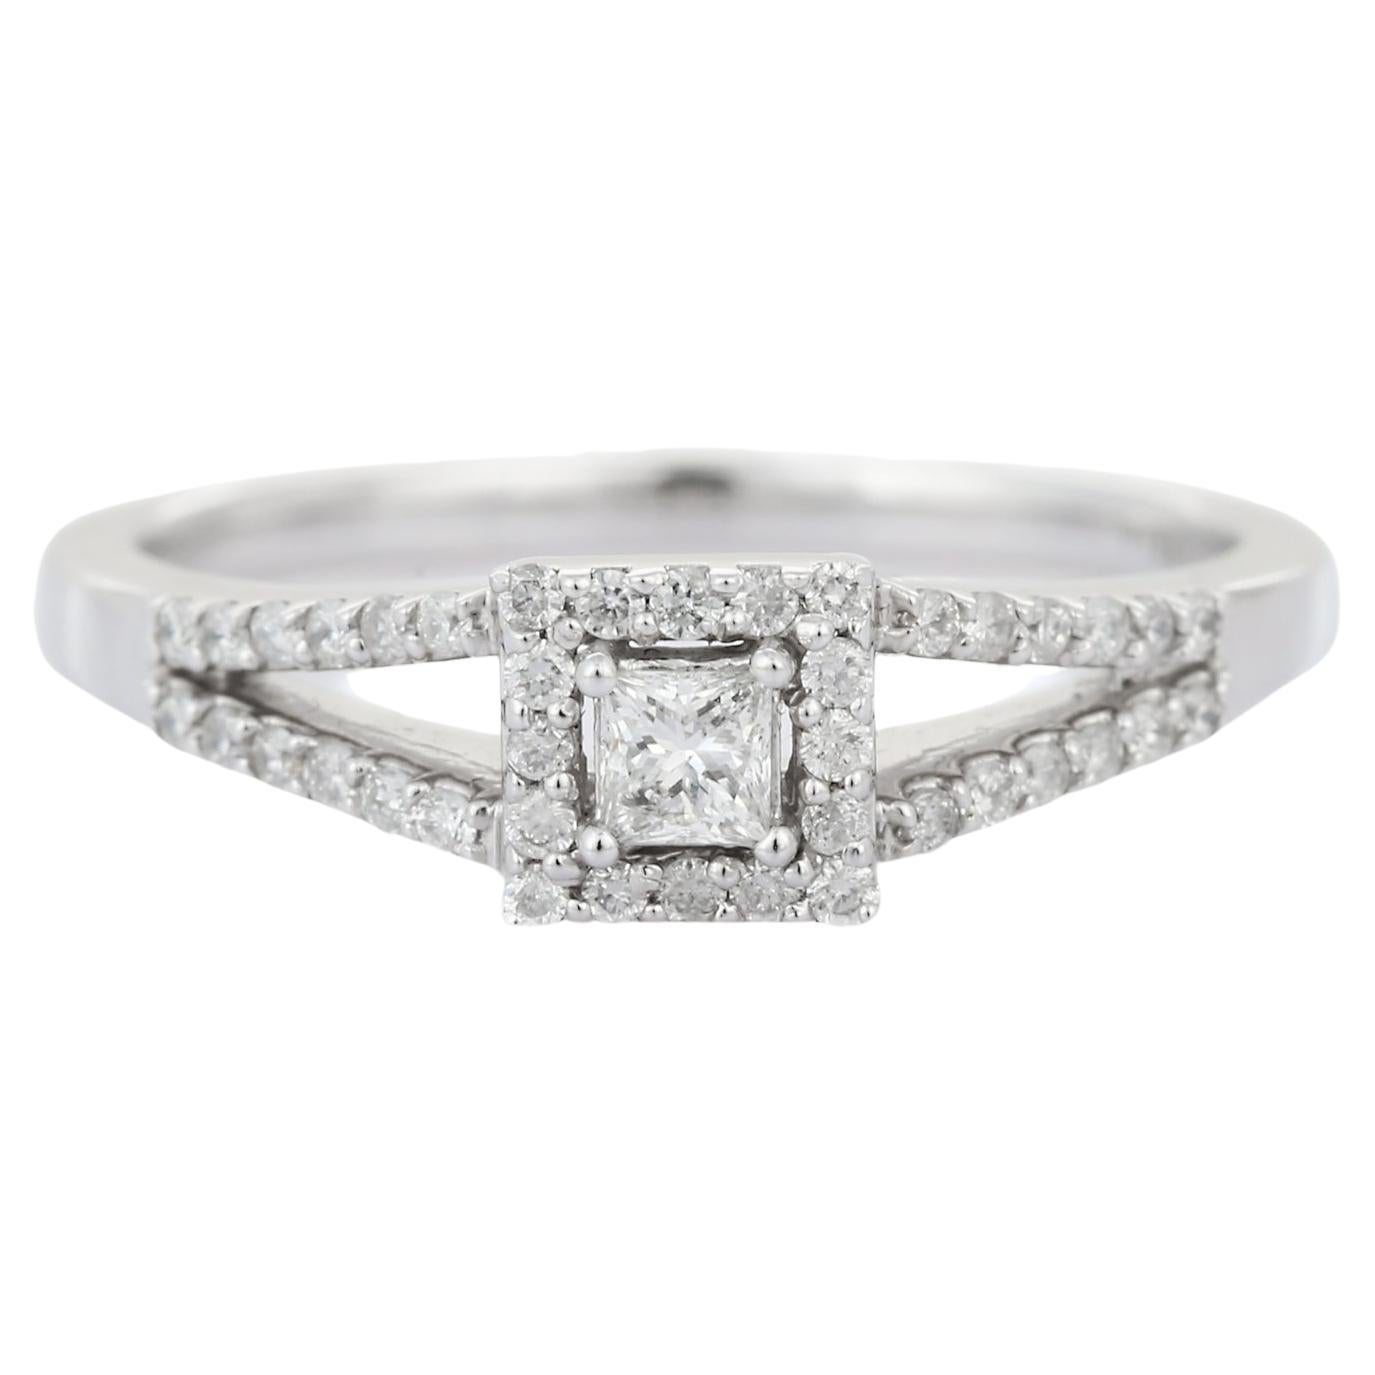 For Sale:  18K White Gold Certified Diamond Engagement Ring